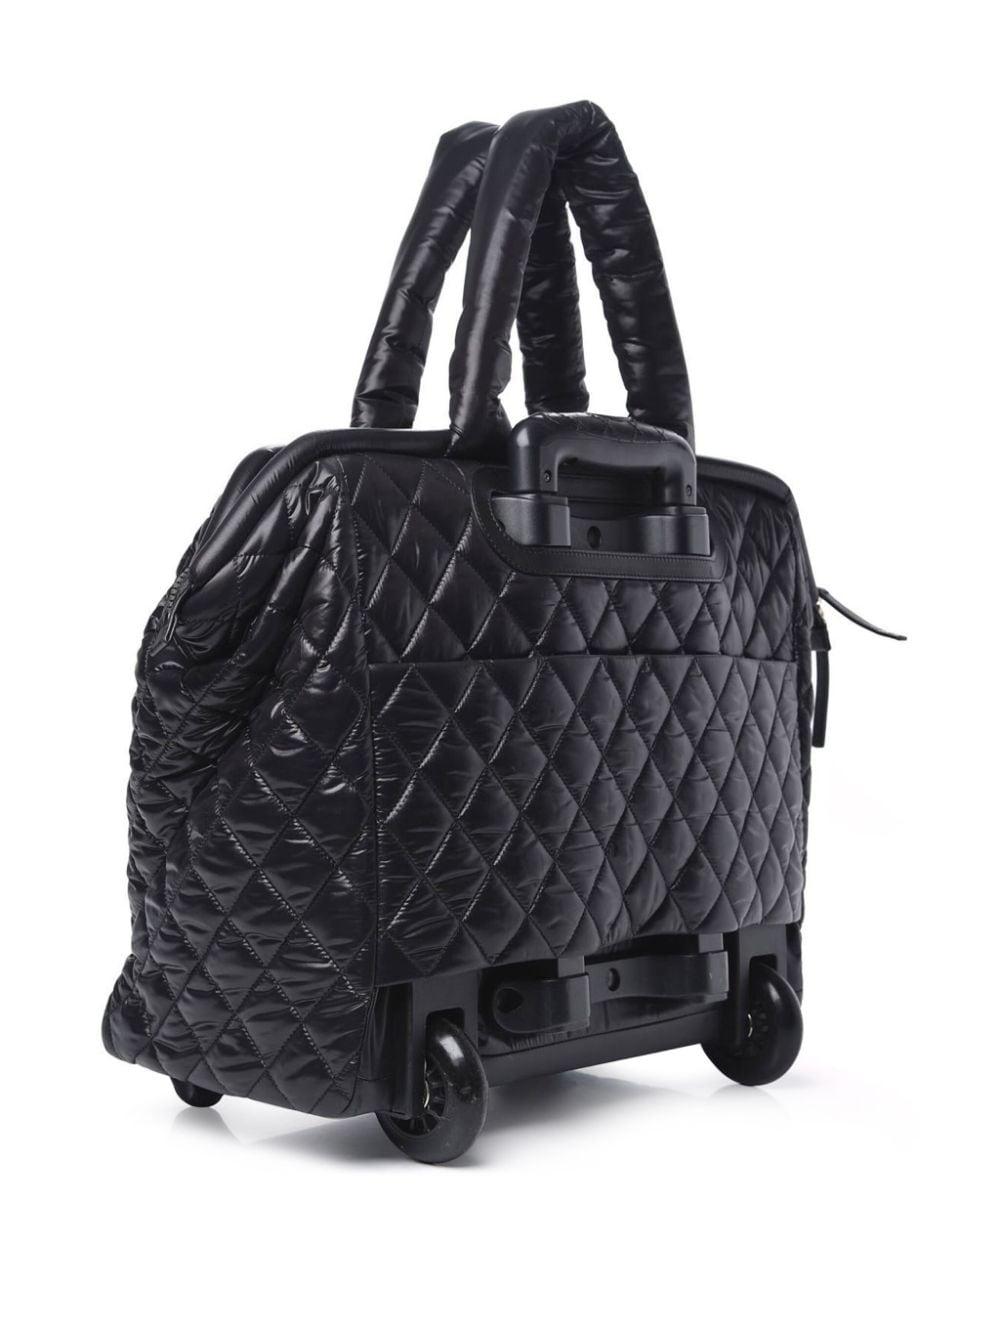 Chanel 2012 Coco Cocoon Quilted Case Carry On Trolley Travel Black Luggage Bag 3